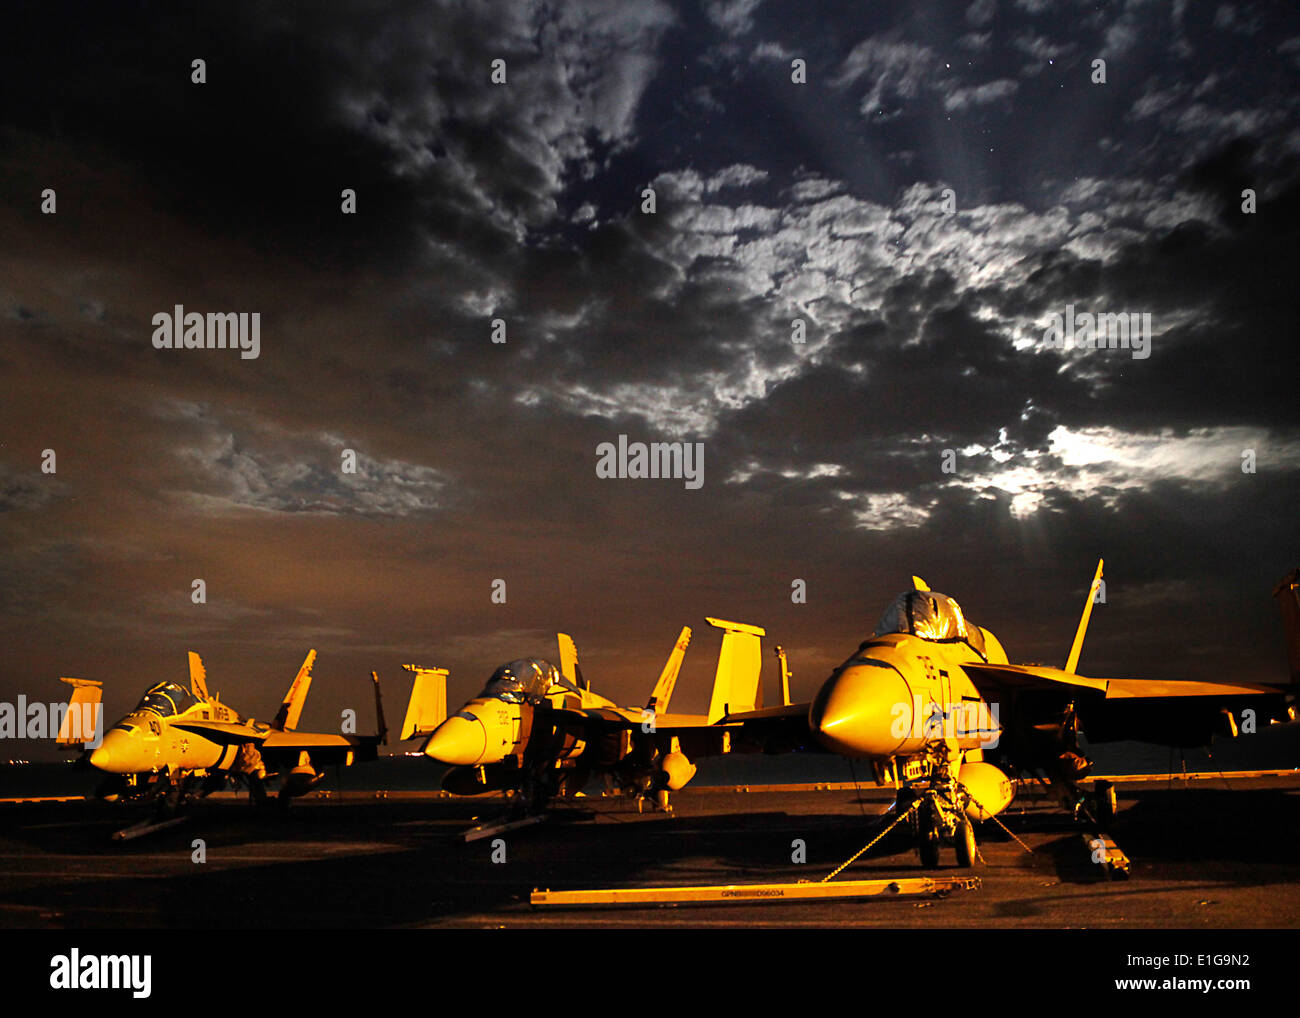 From left, a U.S. Marine Corps F/A-18C Hornet and two Navy F/A-18E-F Super Hornet aircraft are illuminated by lights on board t Stock Photo